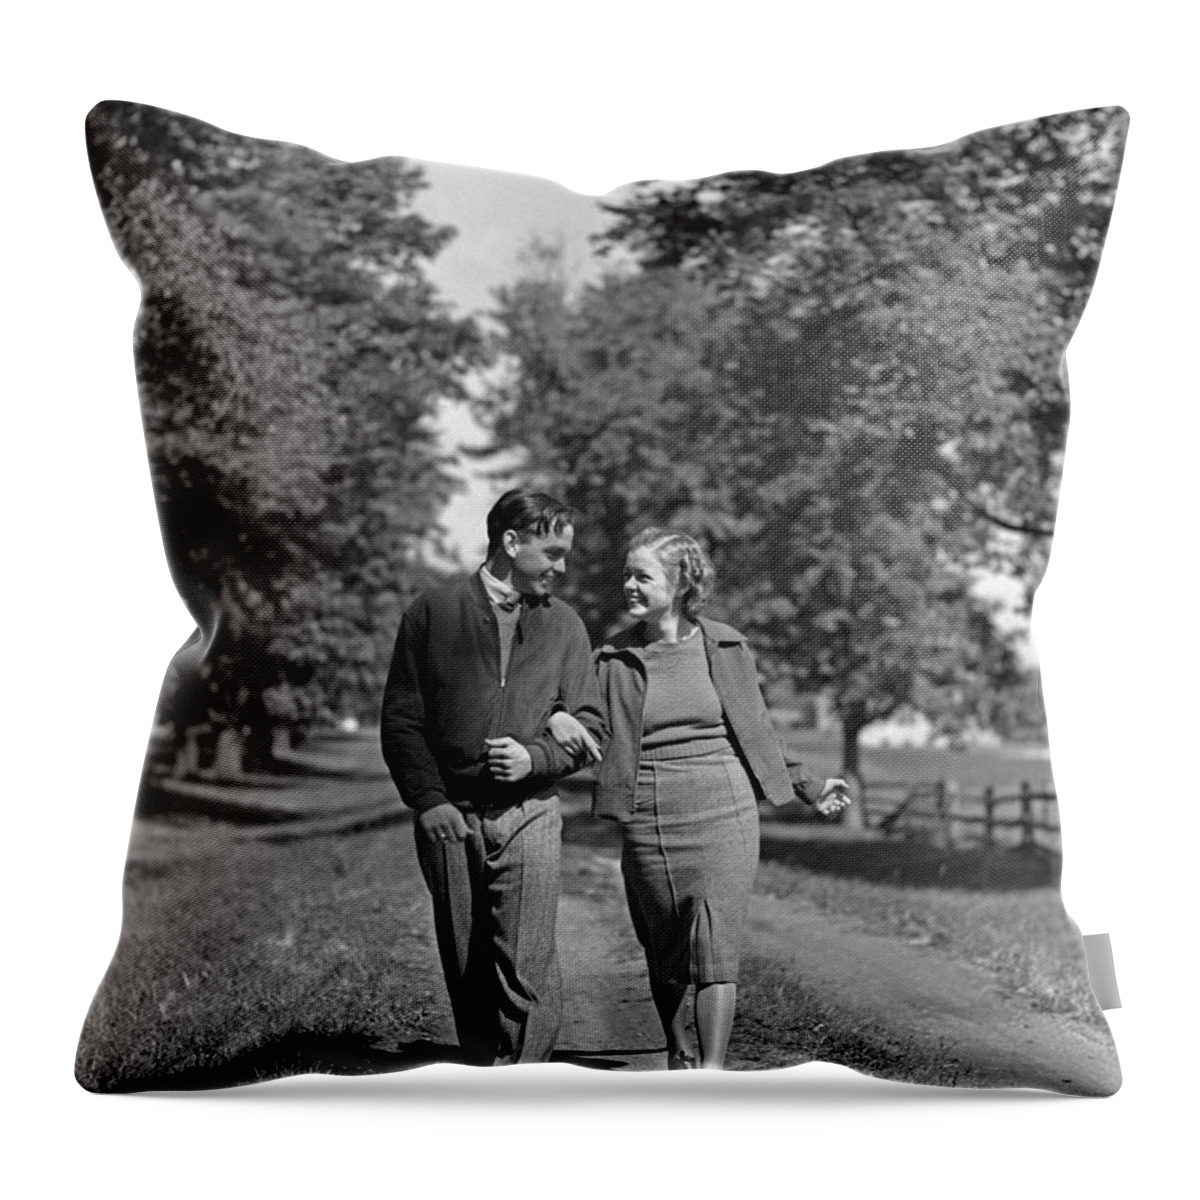 1930s Throw Pillow featuring the photograph Teen Couple Out For A Walk, C.1930-40s by H. Armstrong Roberts/ClassicStock